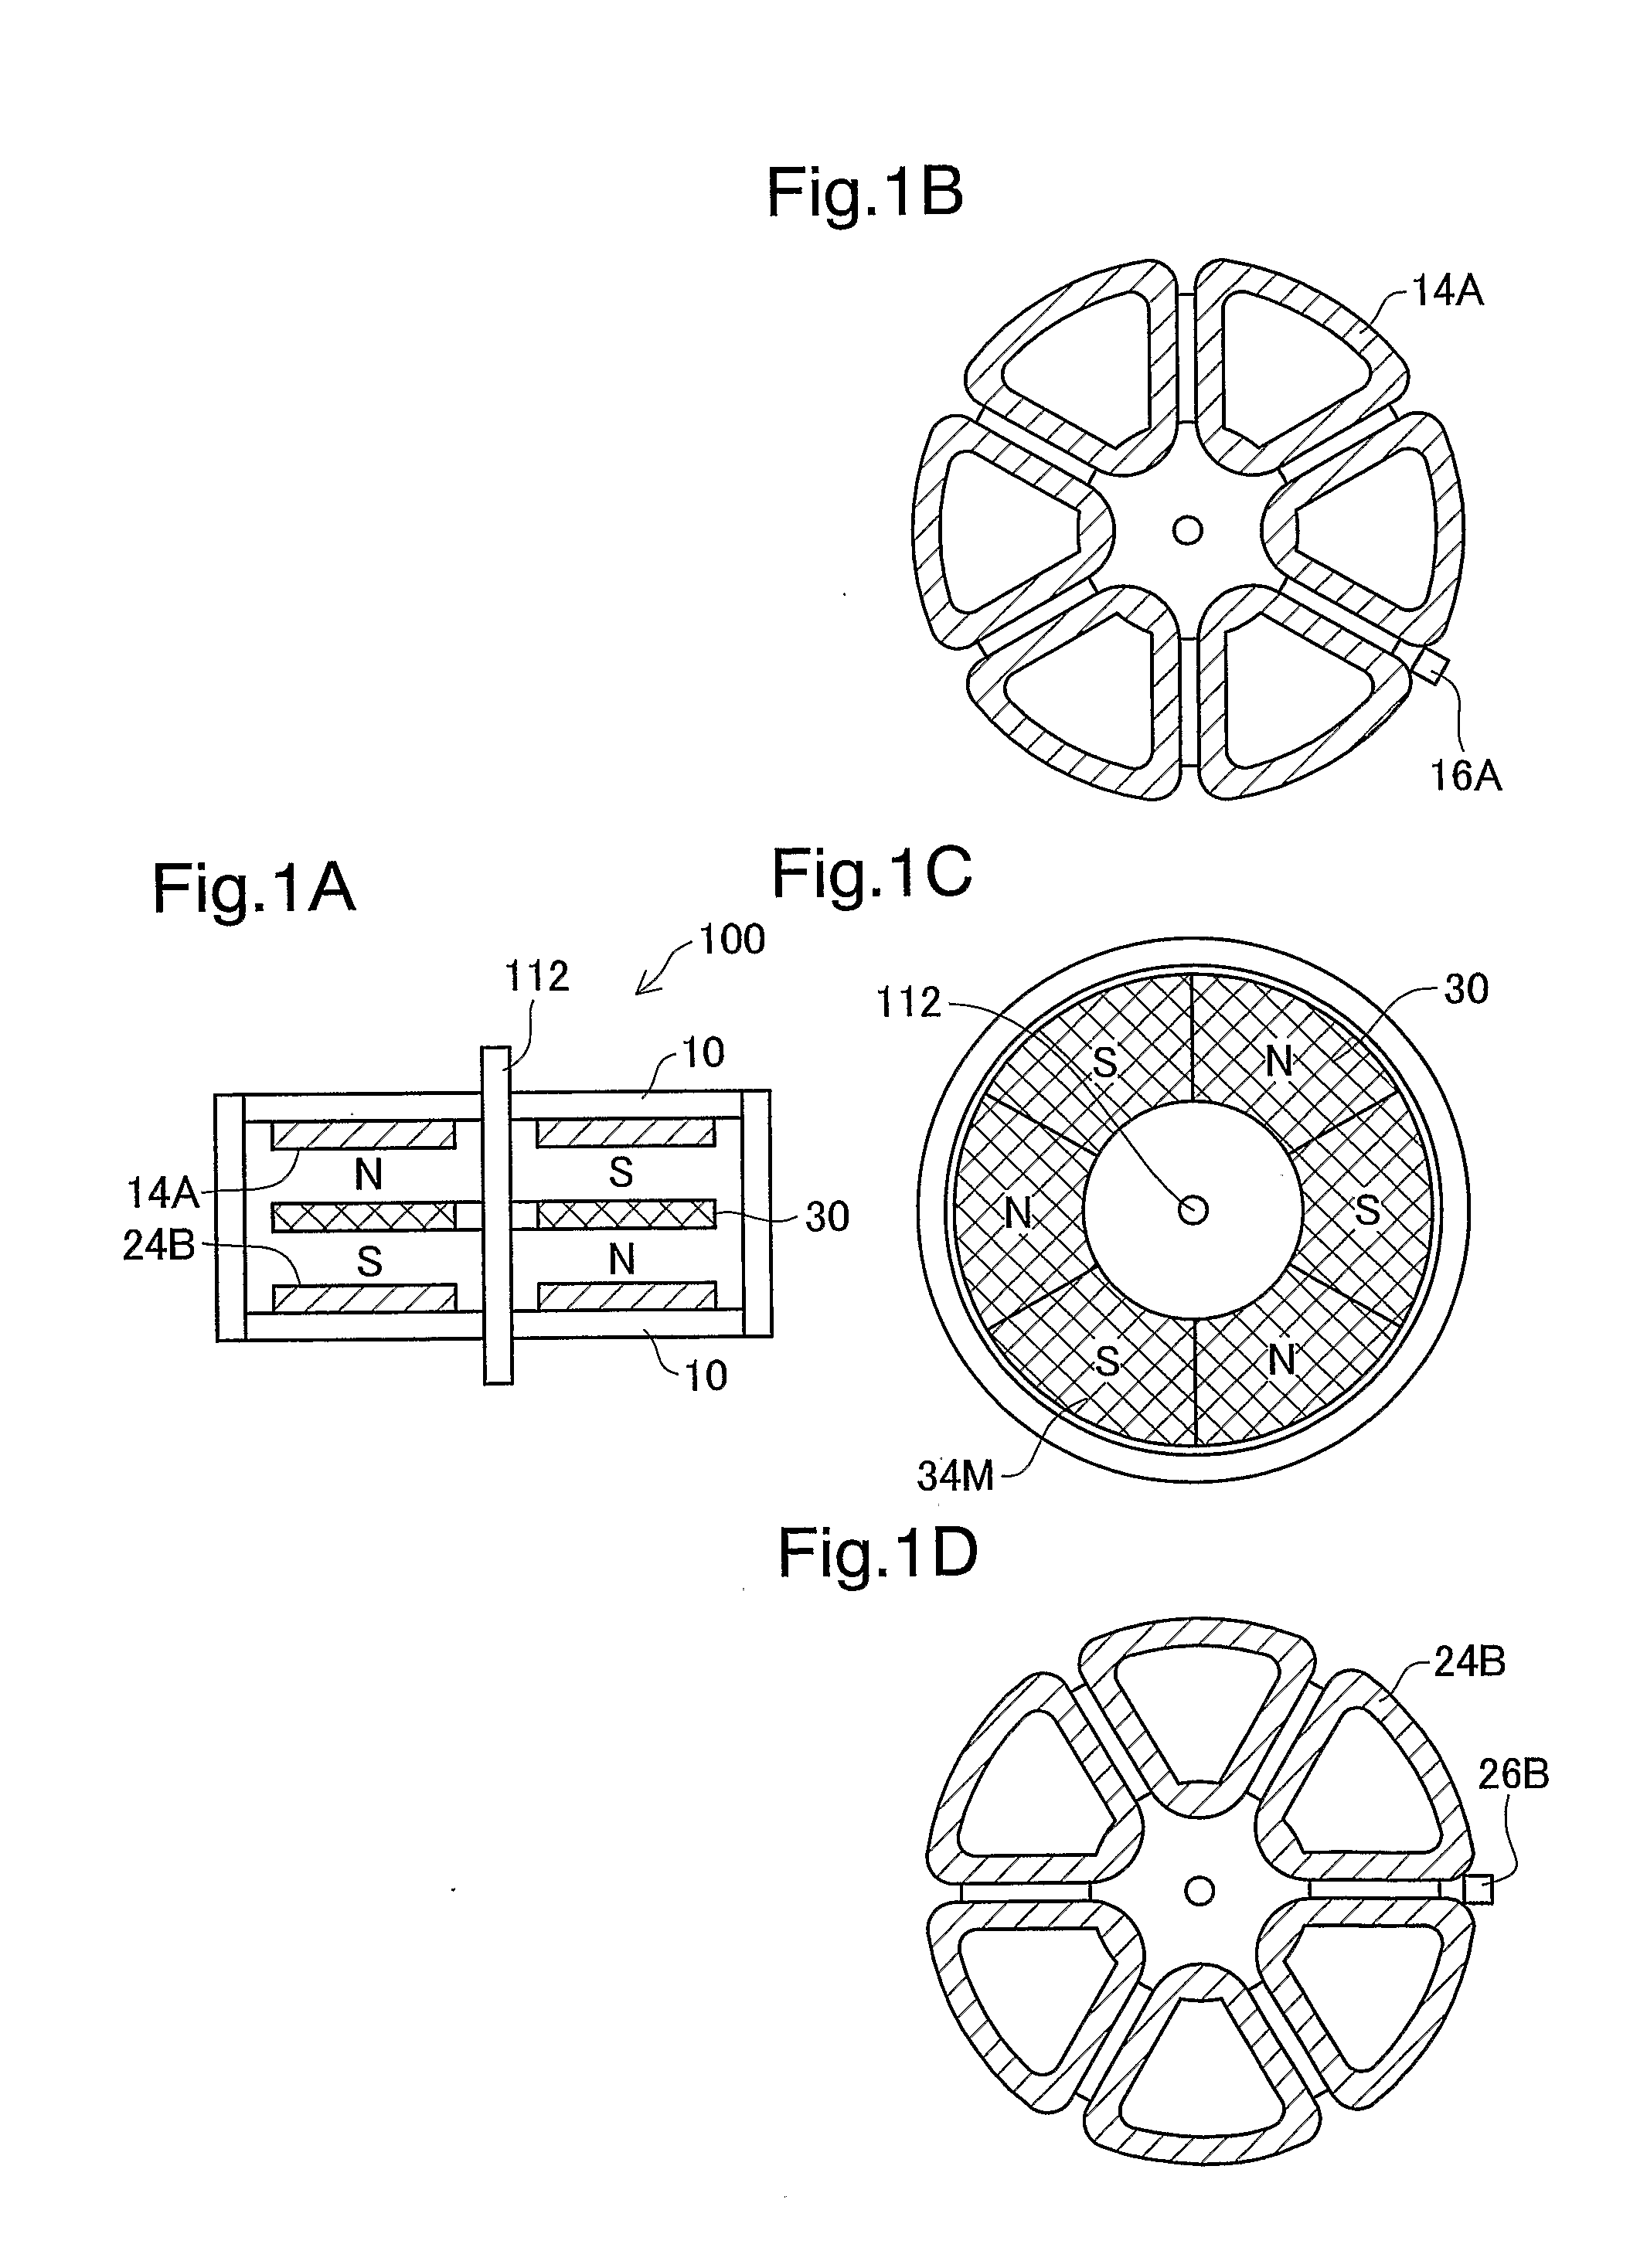 Electric Motor, Drive System Employing Multiple Electric Motors, and Method for Controlling the Same